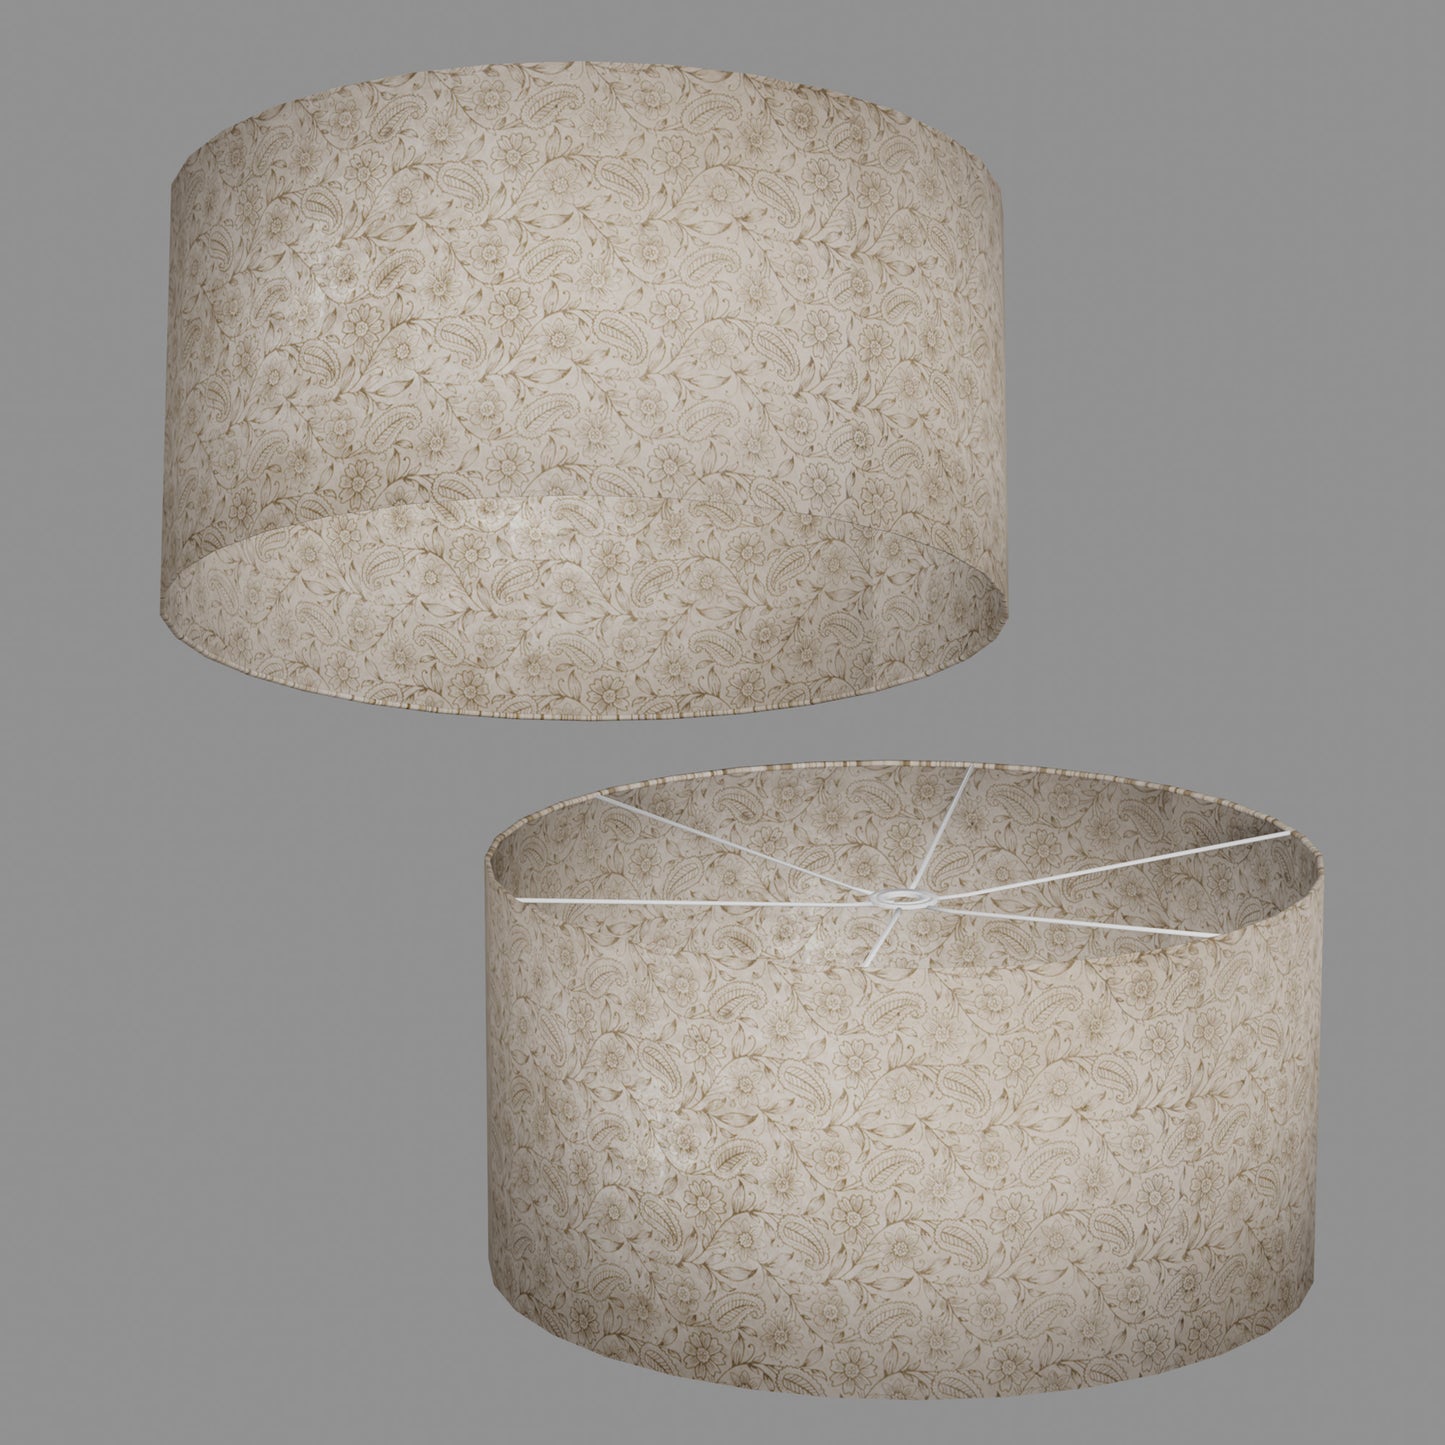 Drum Lamp Shade - P69 - Garden Gold on Natural, 60cm(d) x 30cm(h)